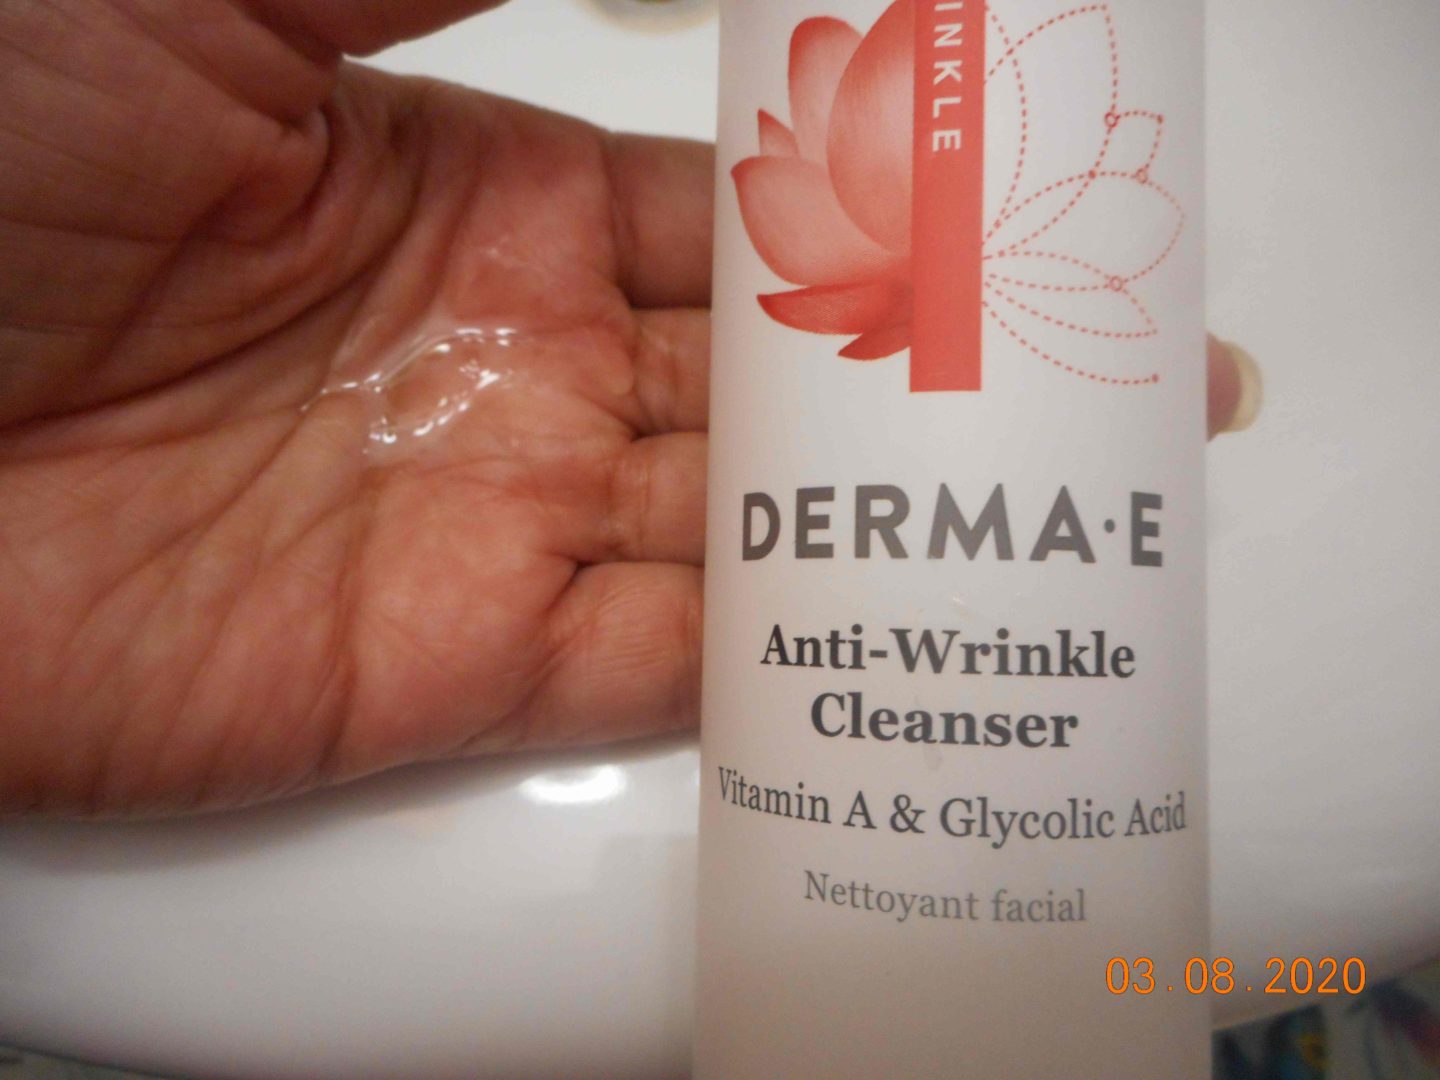 derma-e cleanser inhand with bottle anti-wrinkle cleanser